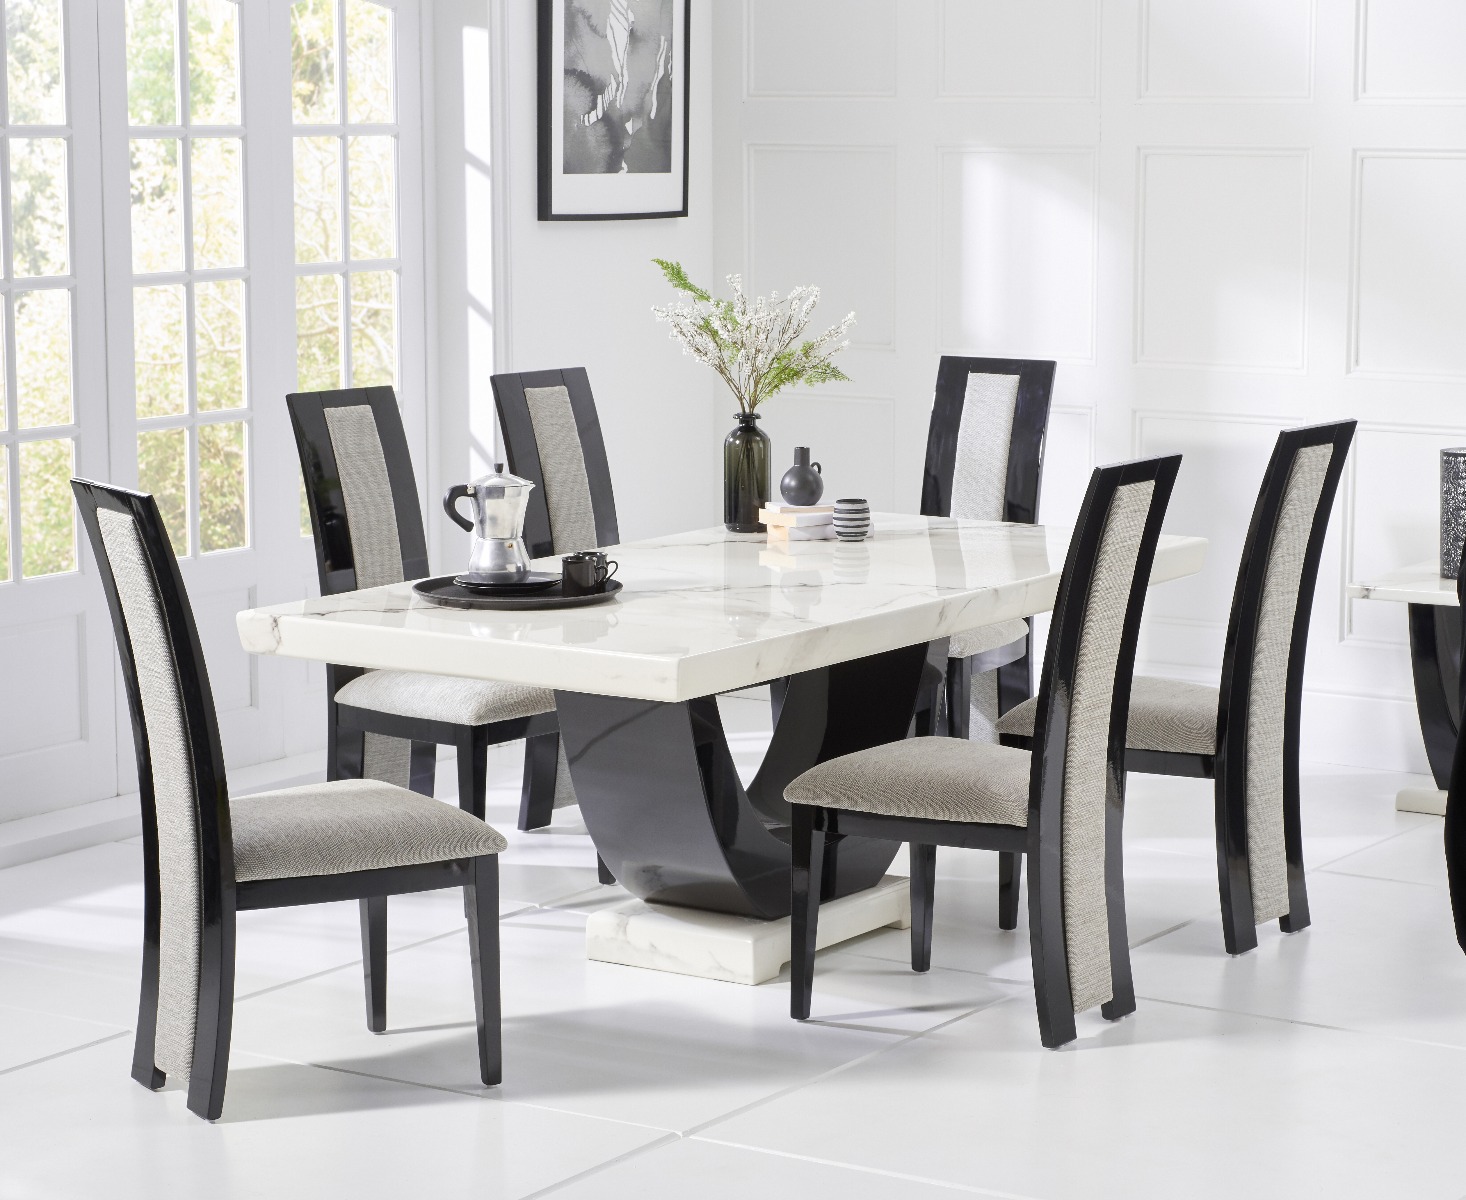 Pedestal Marble Dining Table, Dining Table And Chairs Uk